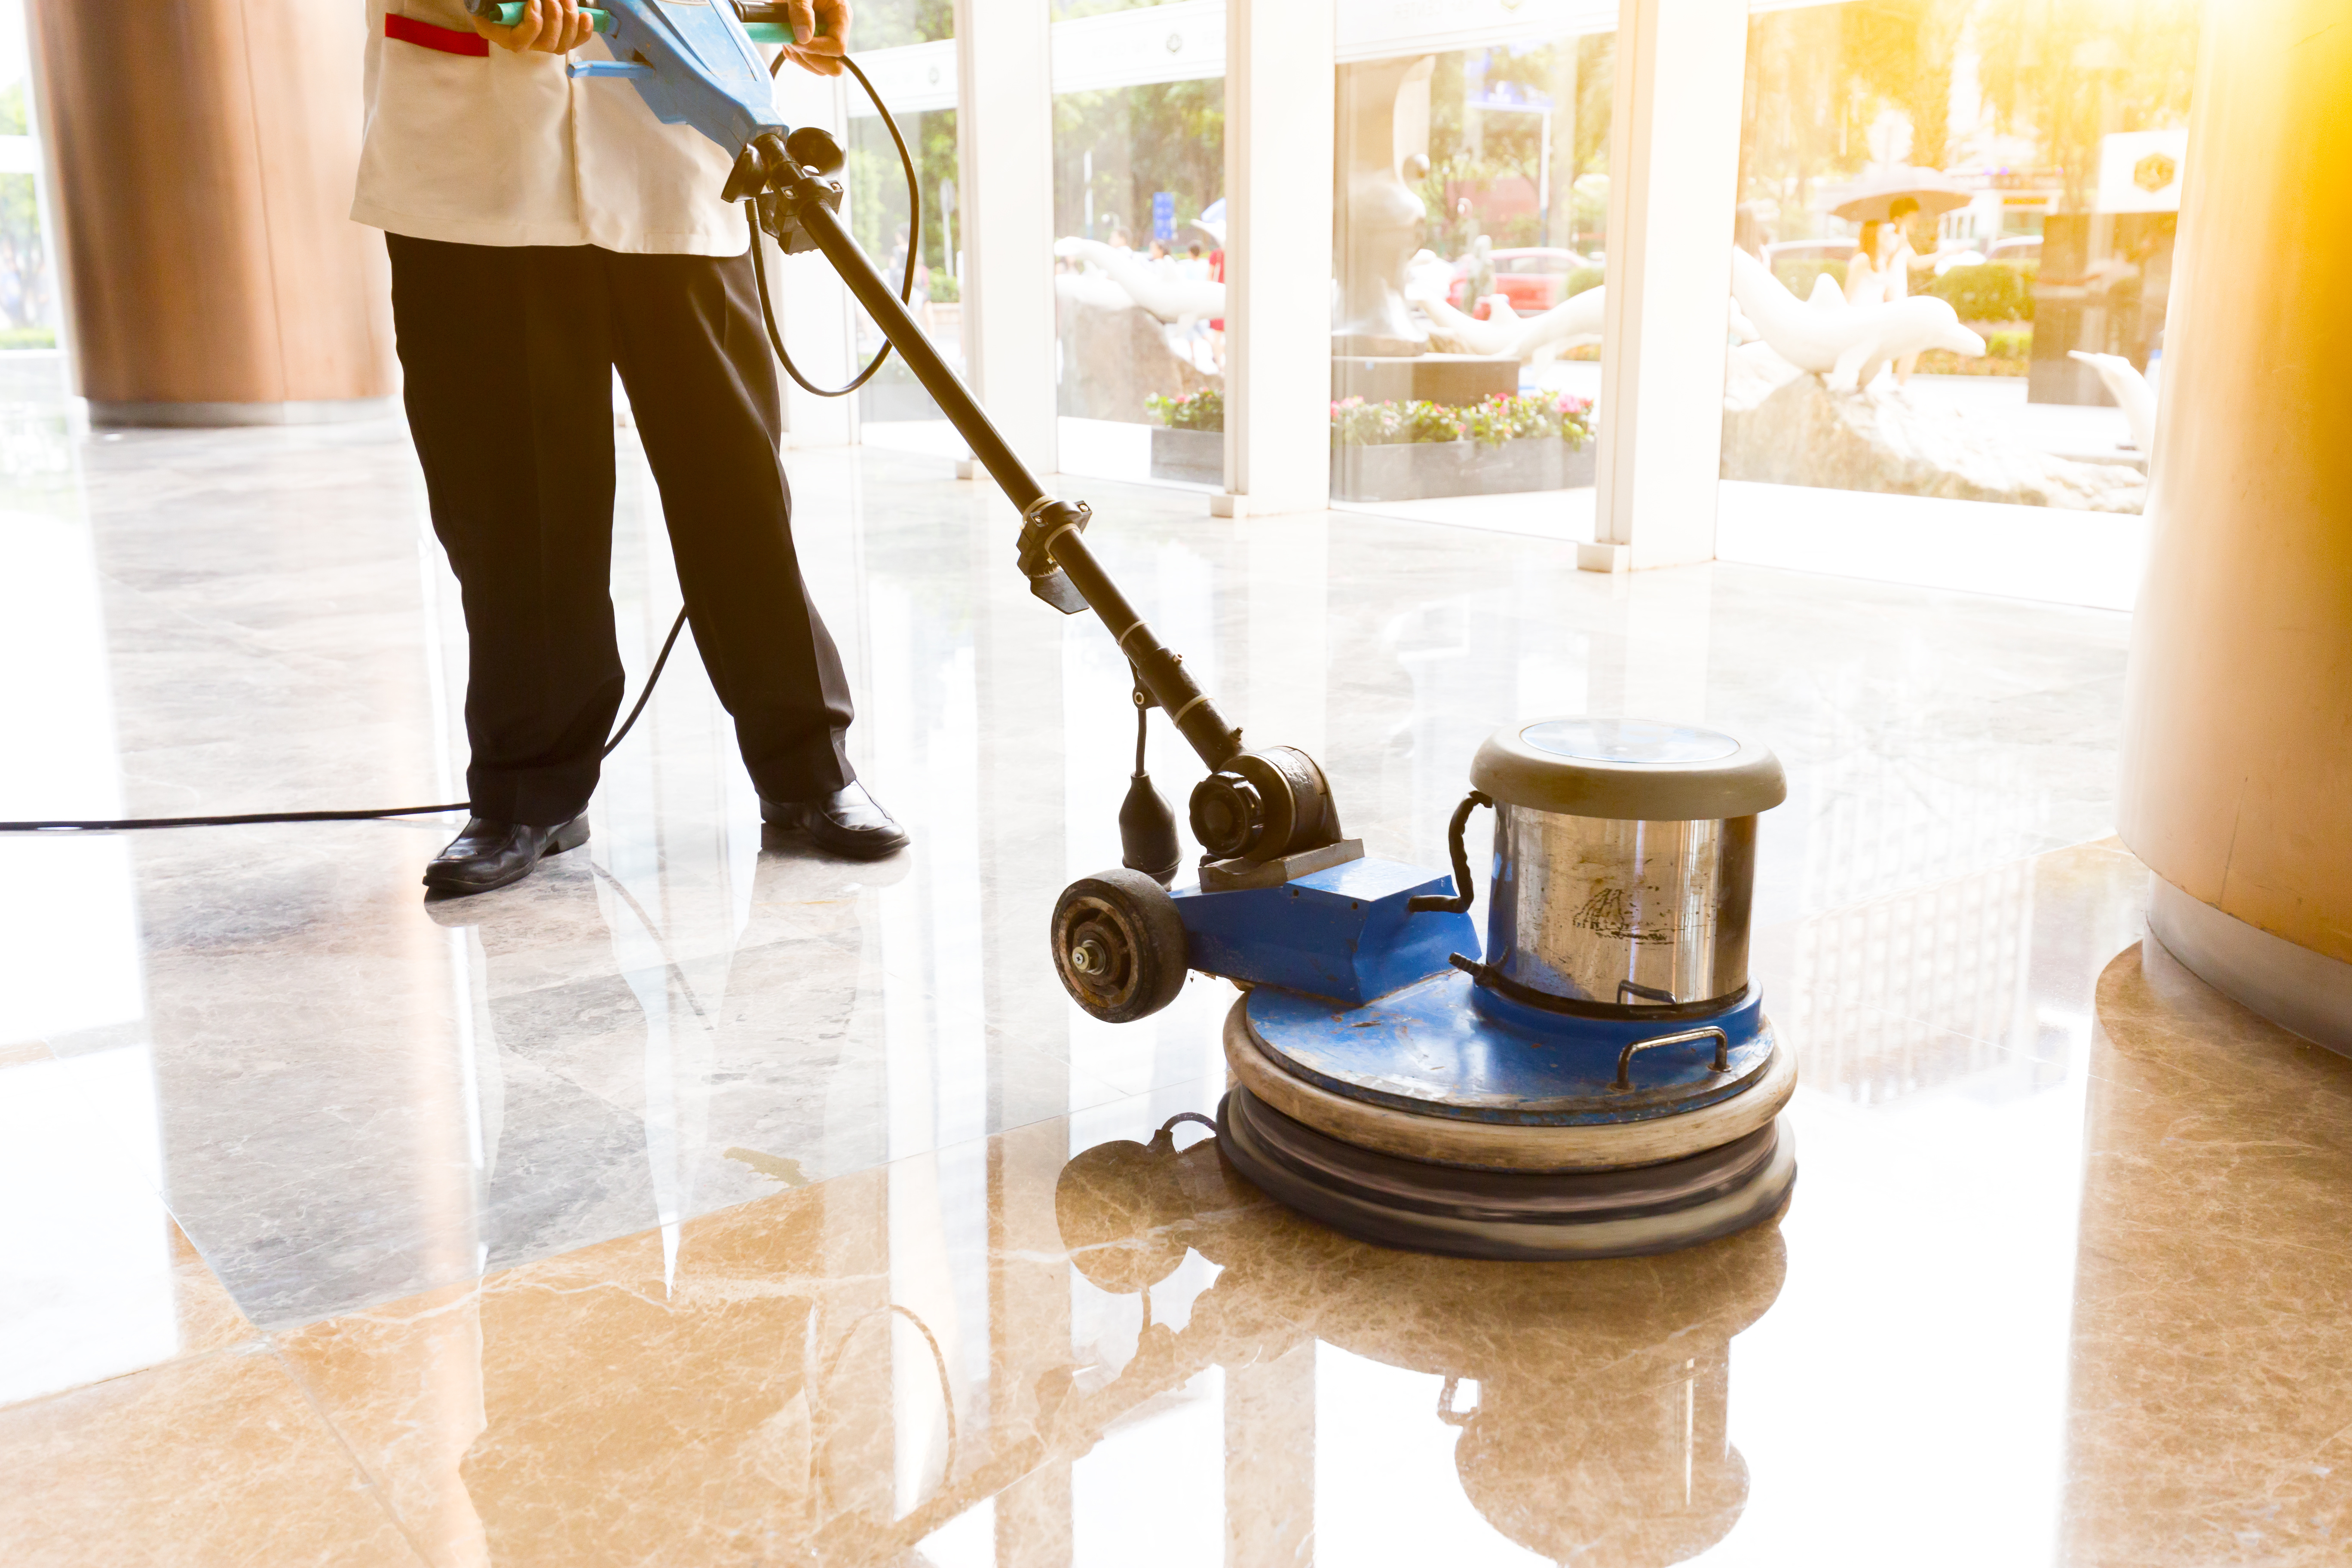 commercial-cleaning-company-washington-dc.jpg